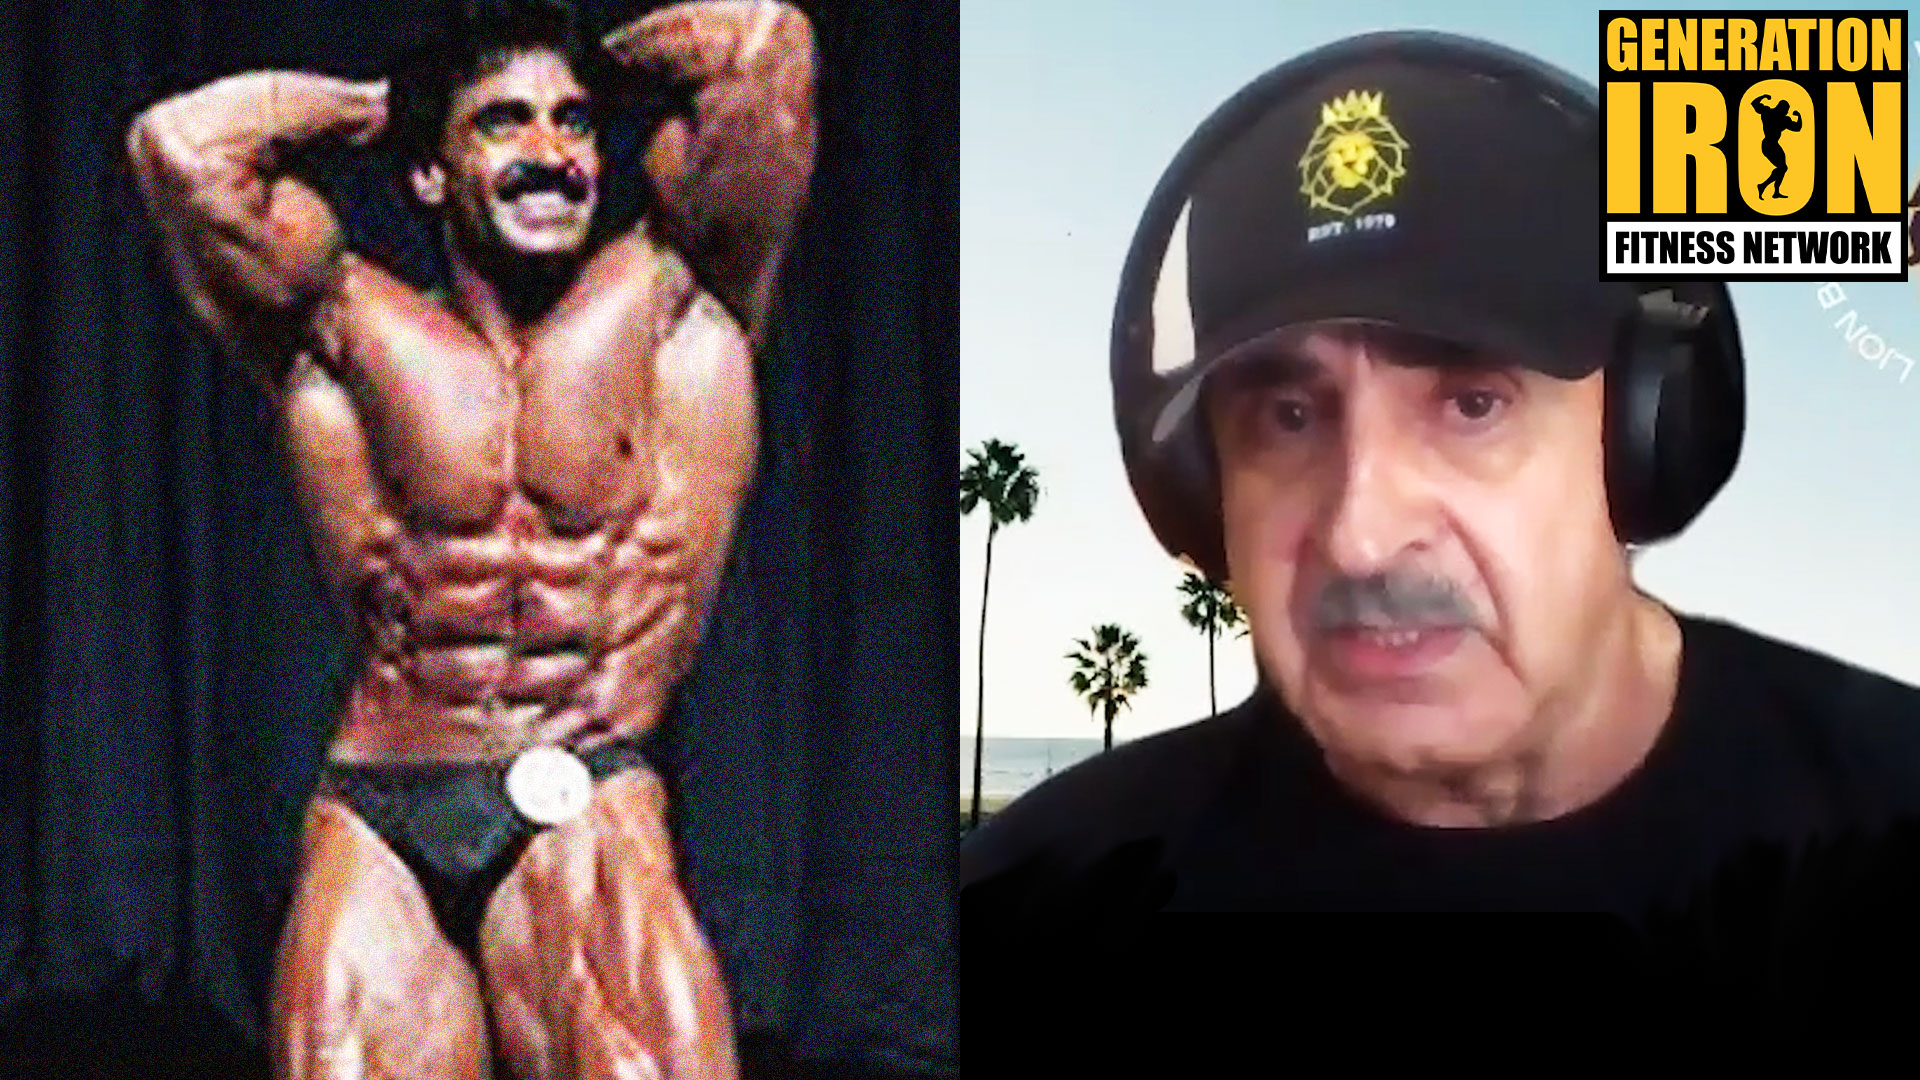 Samir Bannout: “Why Can’t A Guy Who Is 200lbs Beat Someone Who Is 250lbs?”